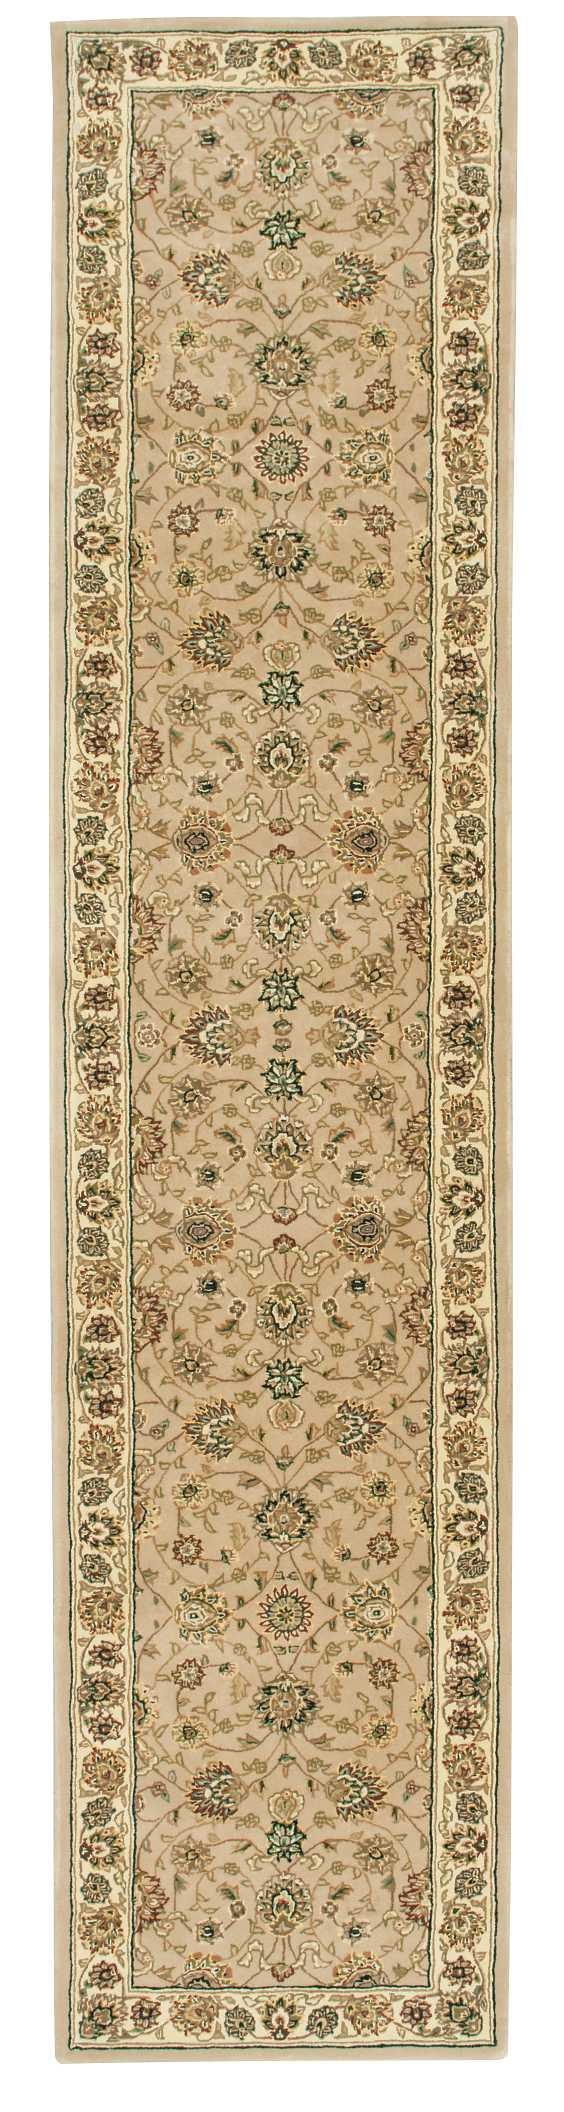 nourison 2000 hand tufted camel rug by nourison nsn 099446858504 4